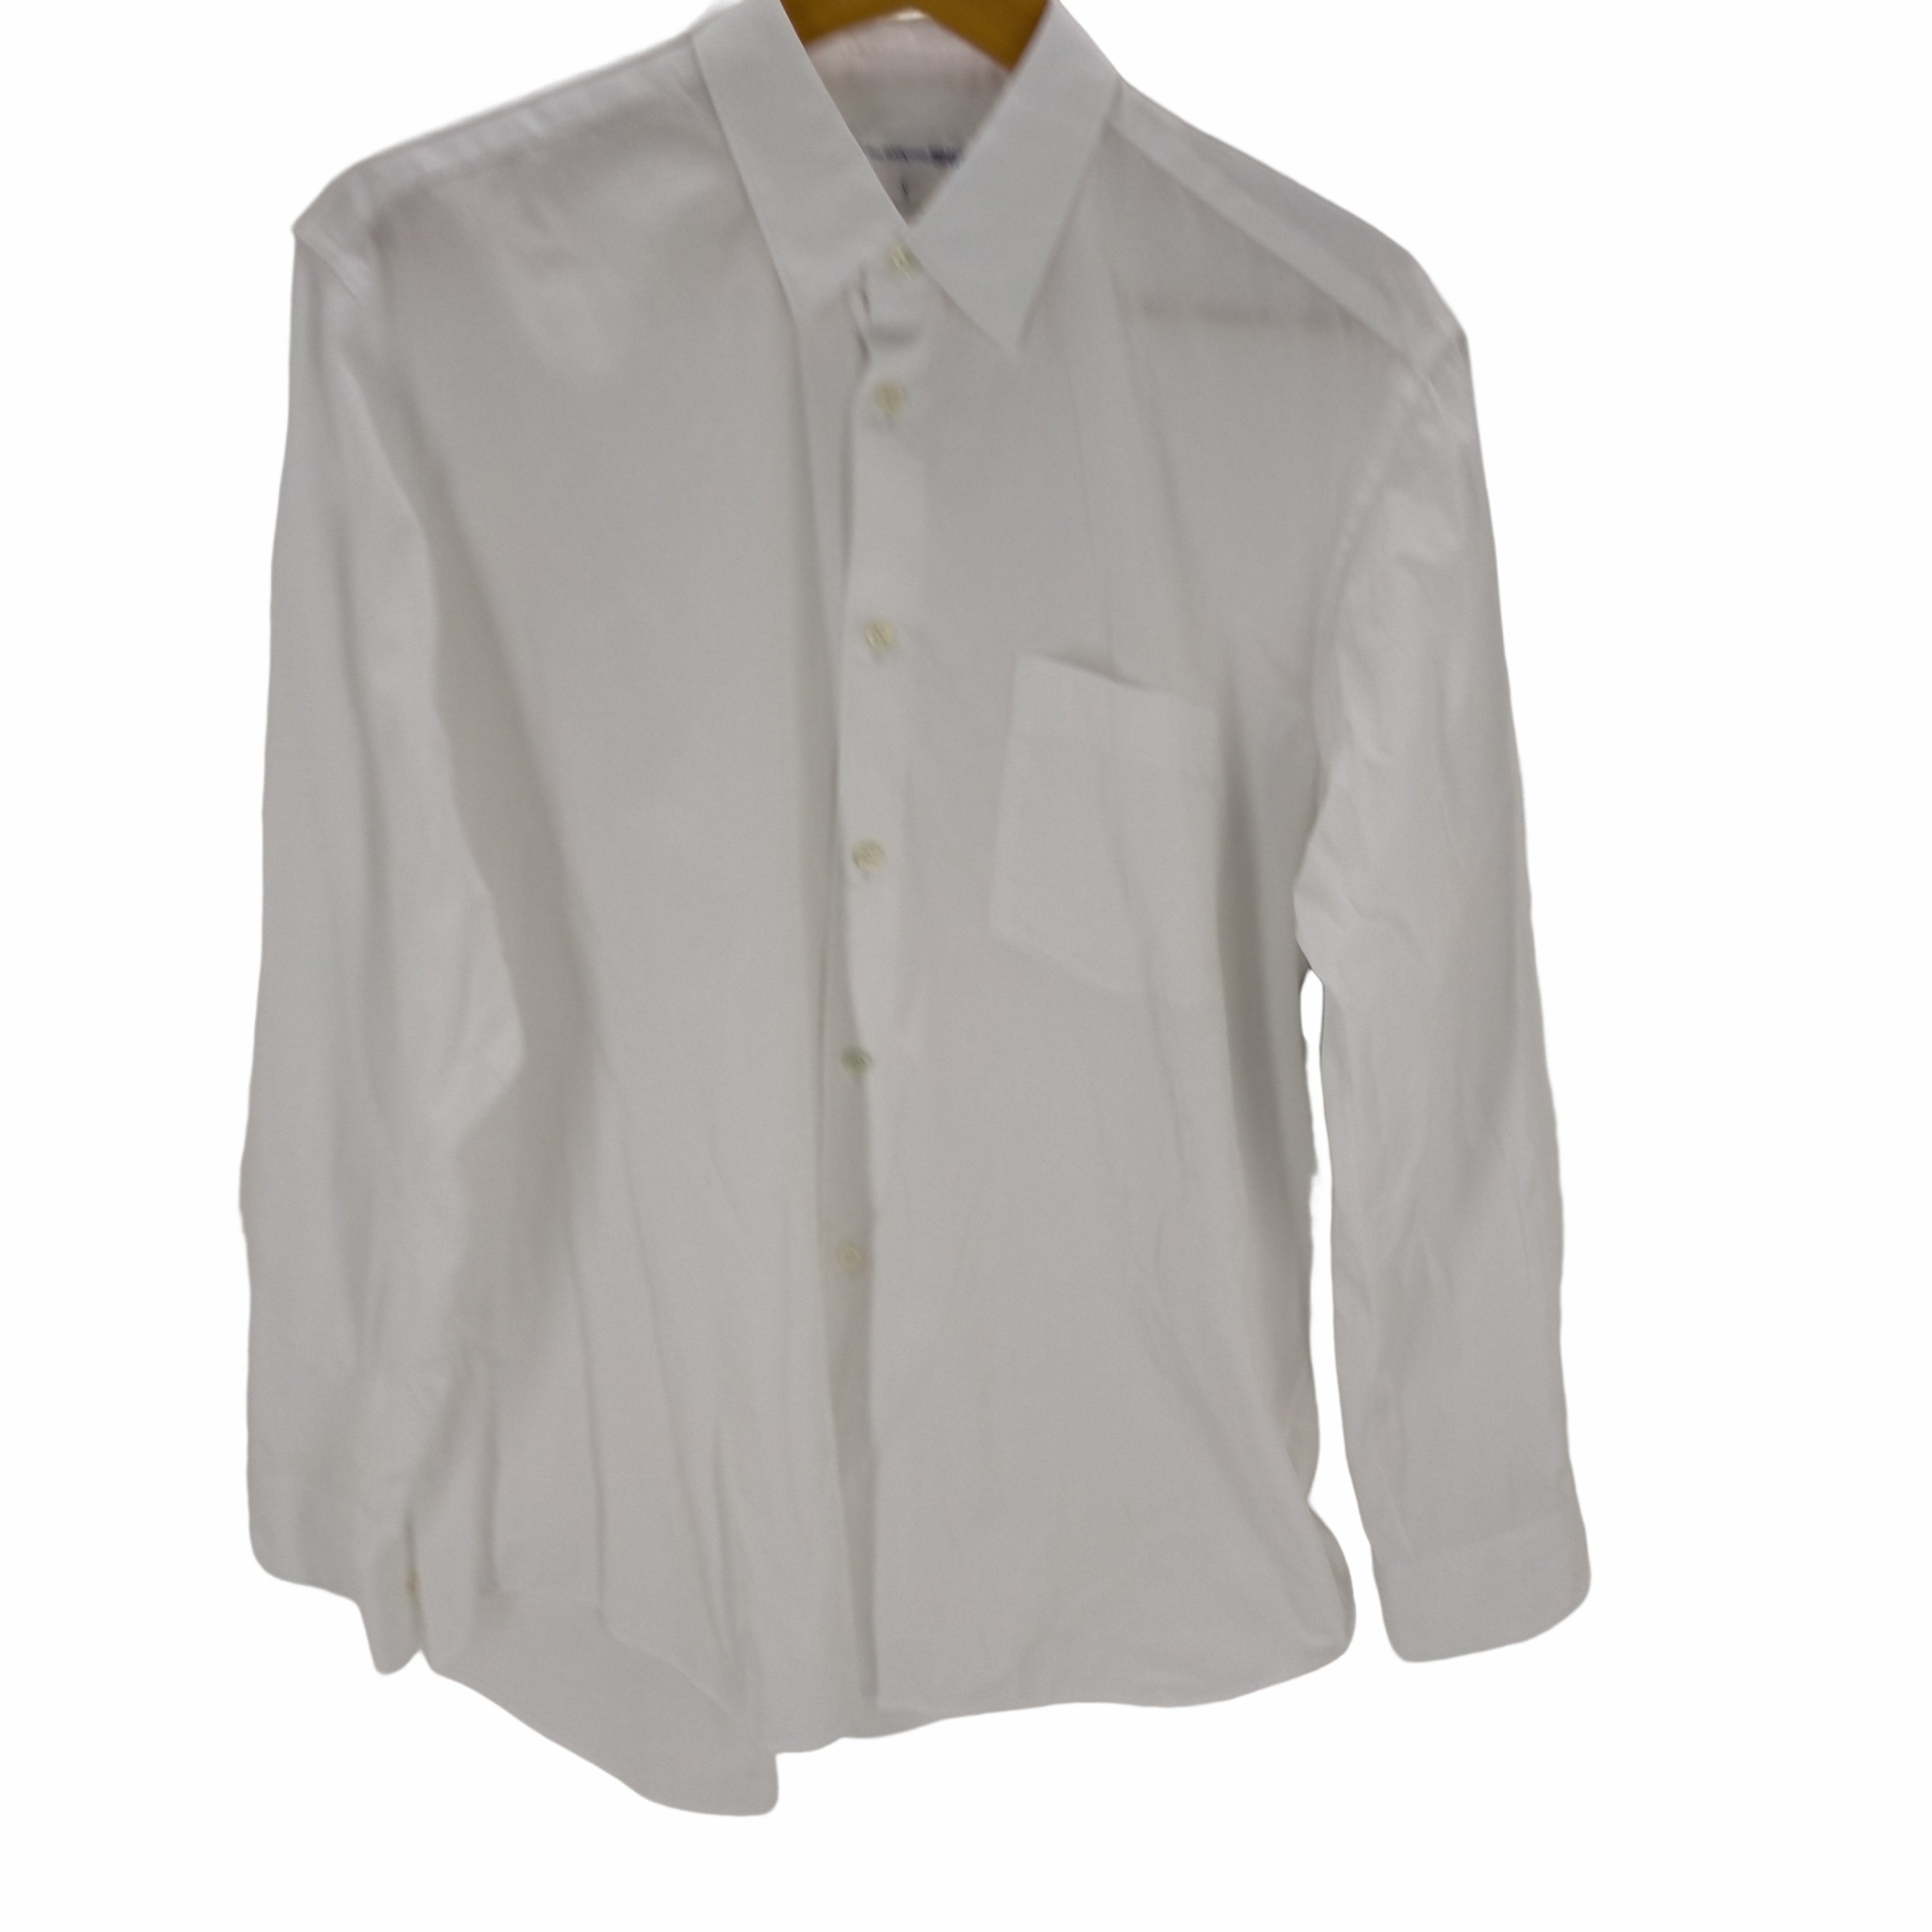 COMME des GARCONS(コムデギャルソン) FZ-B011-PER-1 SHIRT FOREVER White